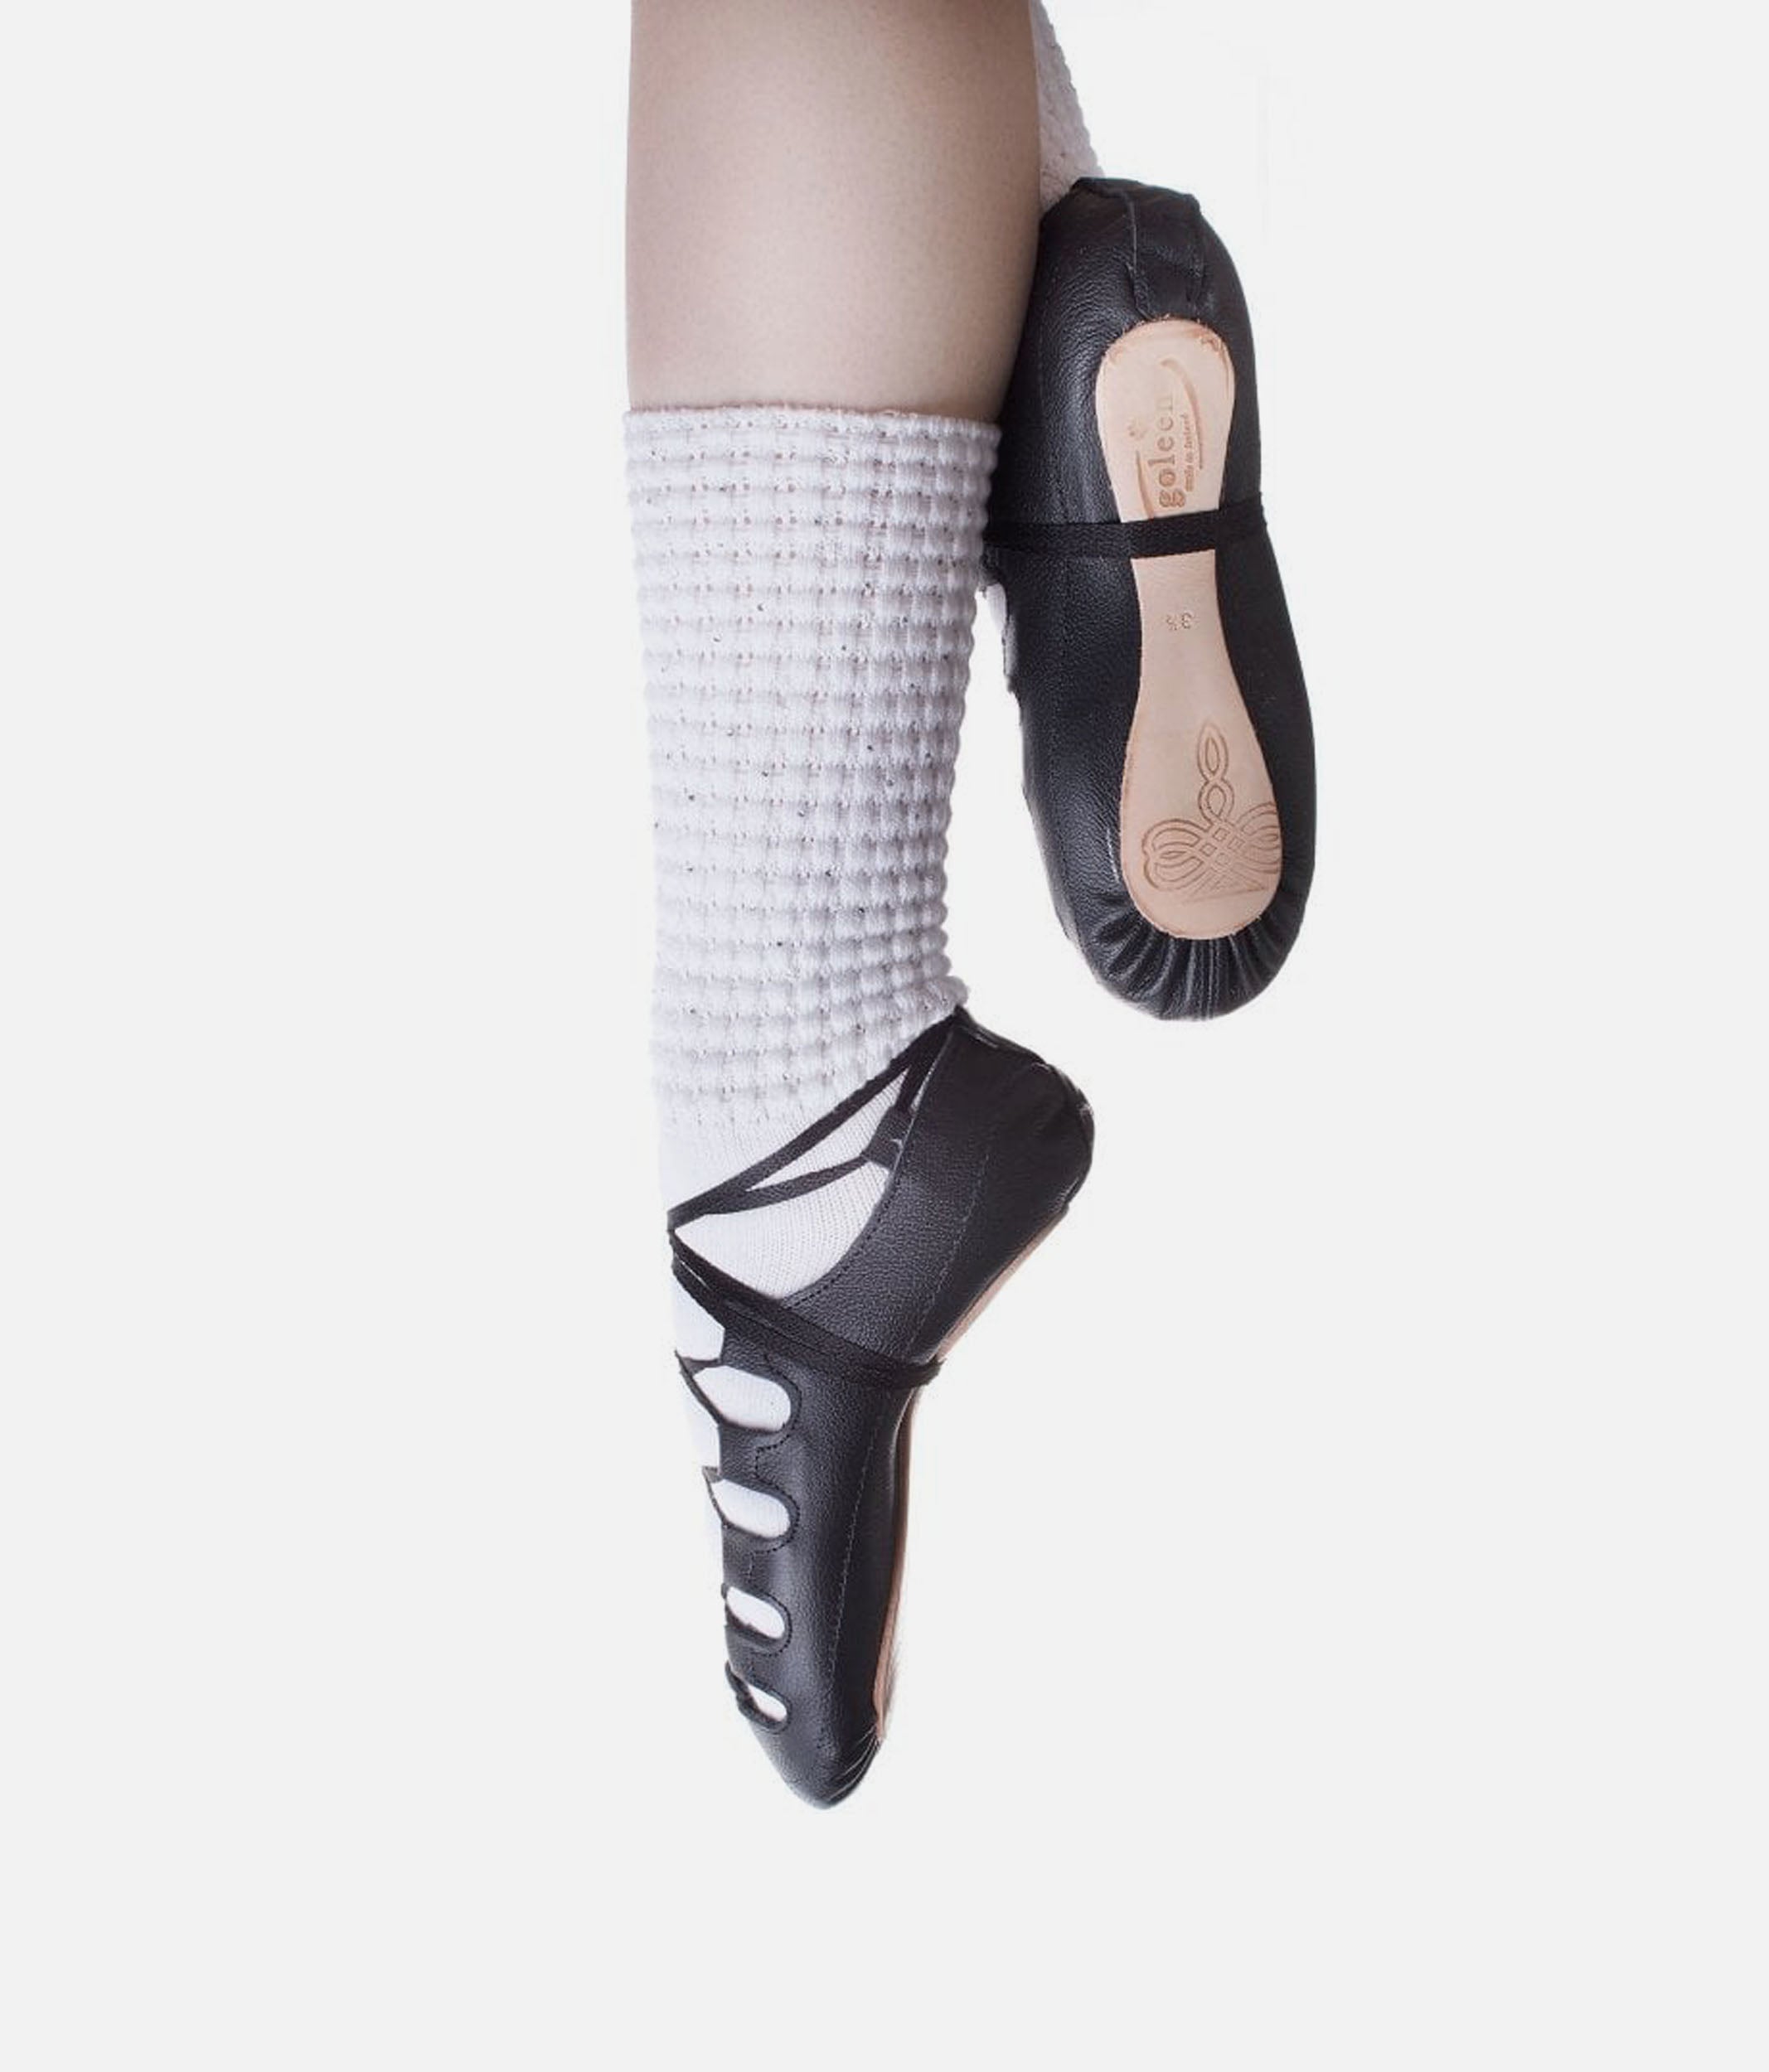 Leddy Uniforms Gorey - The Antonio Pacelli ultra low poodle sock is the  most popular Irish dance sock in the world! If you have ever seen an Irish  dance show or attended